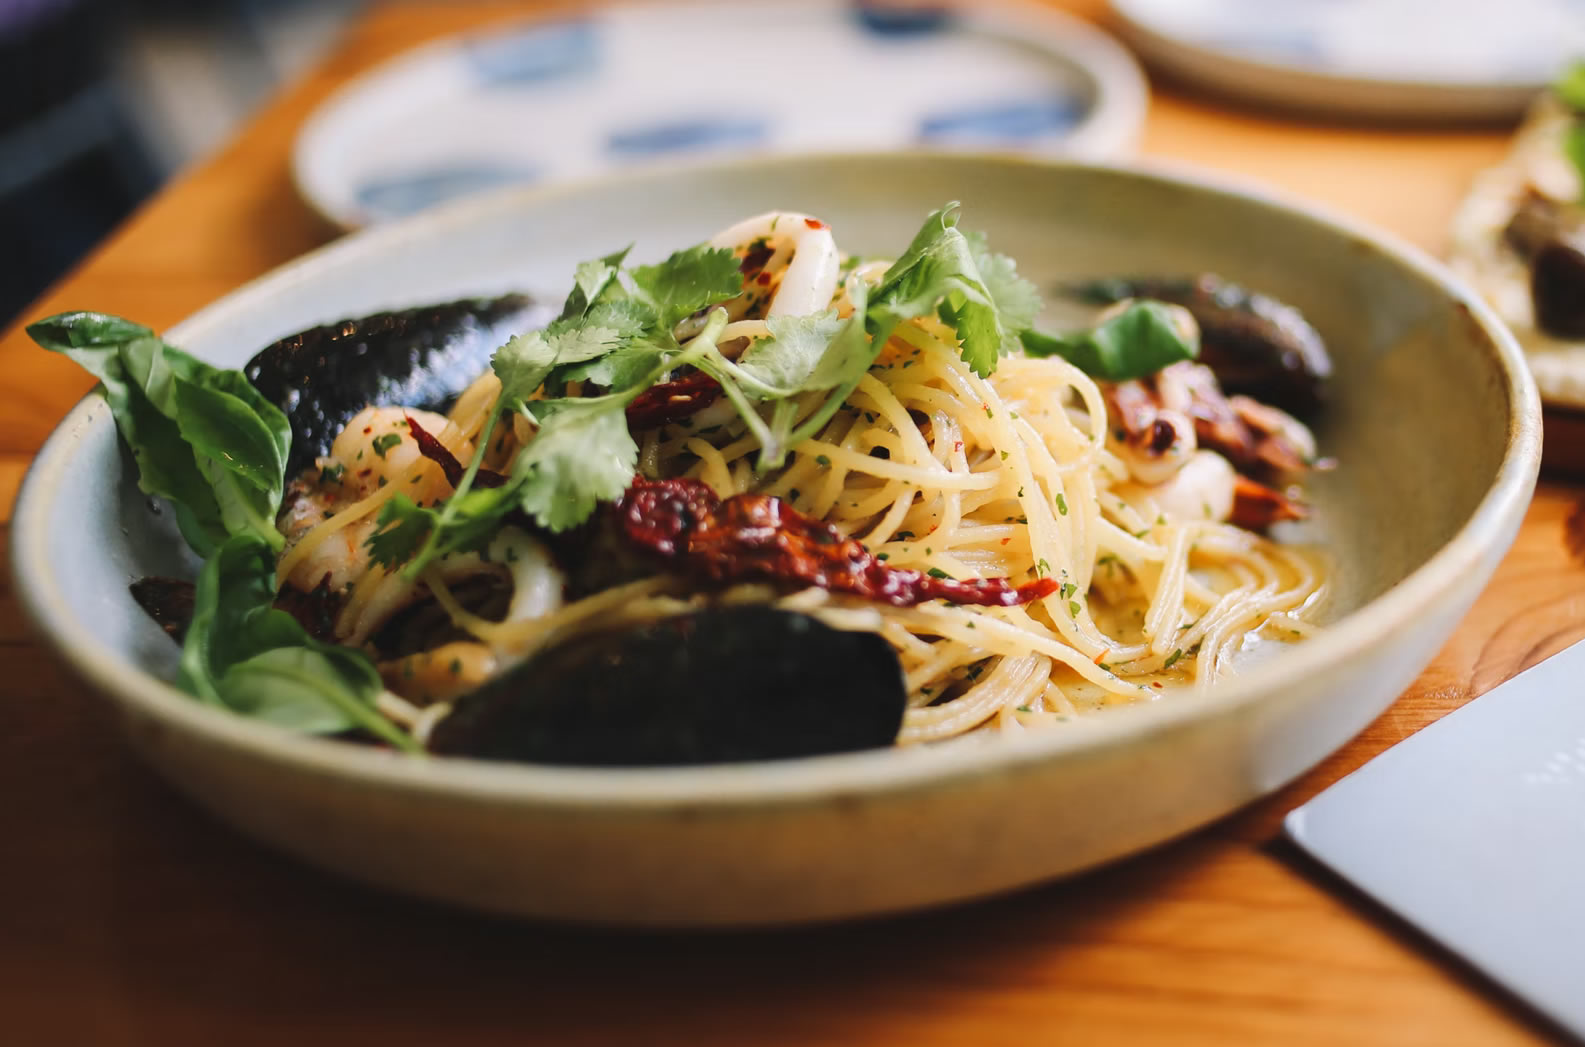 A plate of Spaghetti aglio olio with mussels